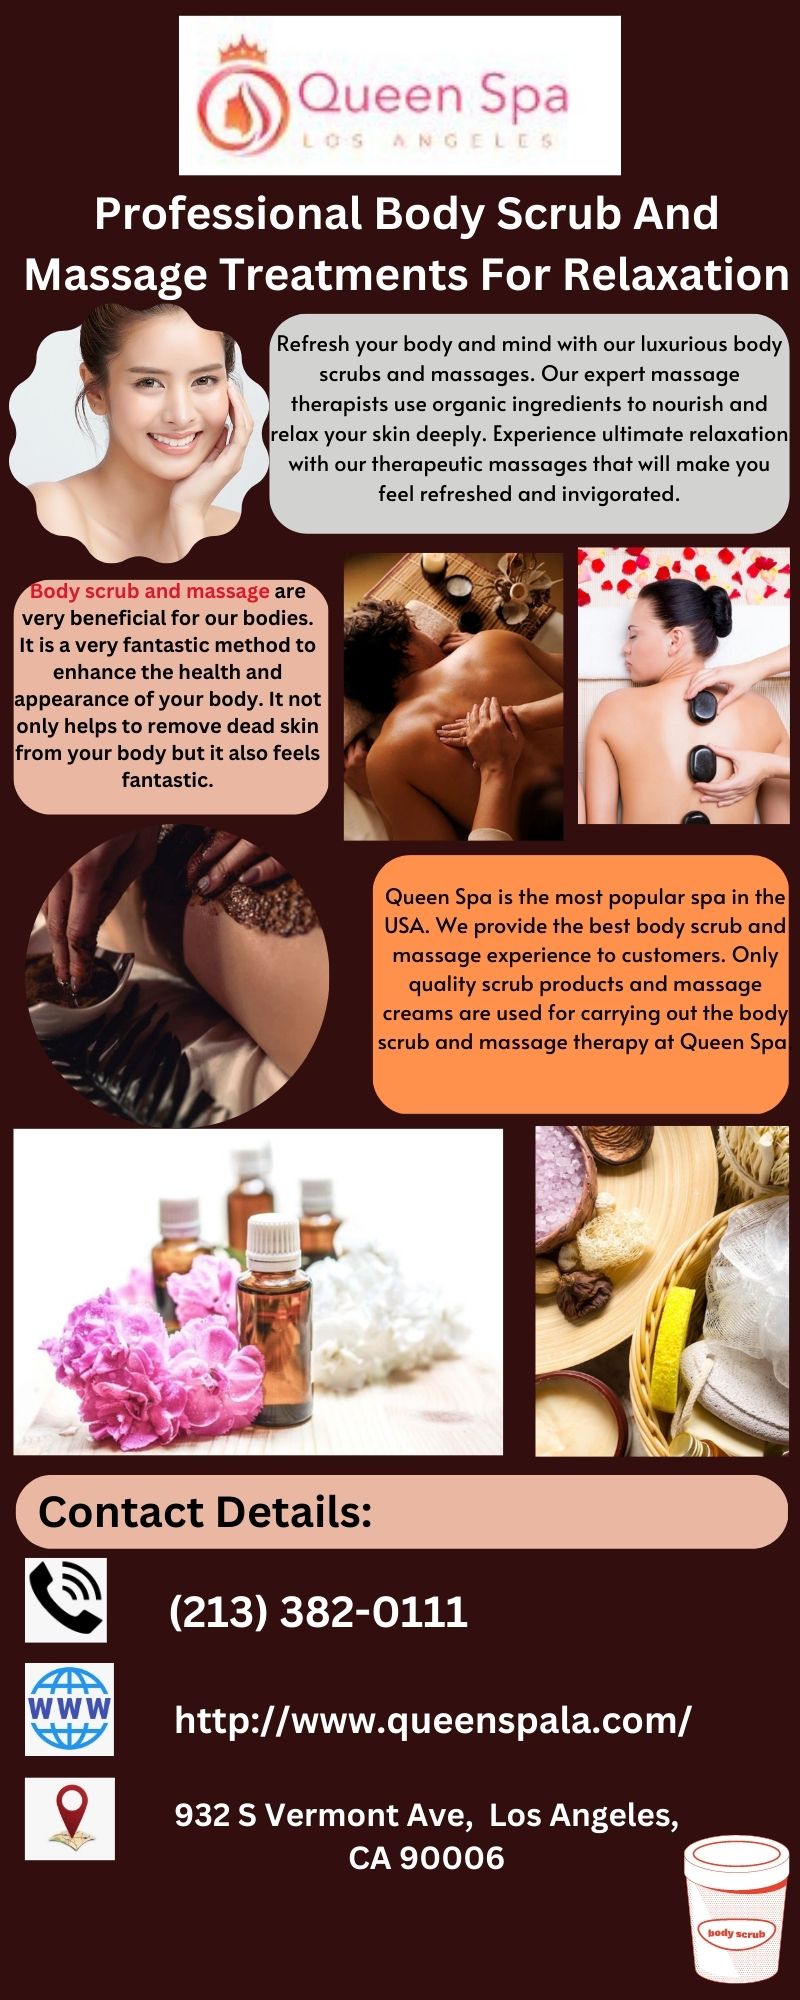 Professional Body Scrub and Massage Treatments for Relaxation